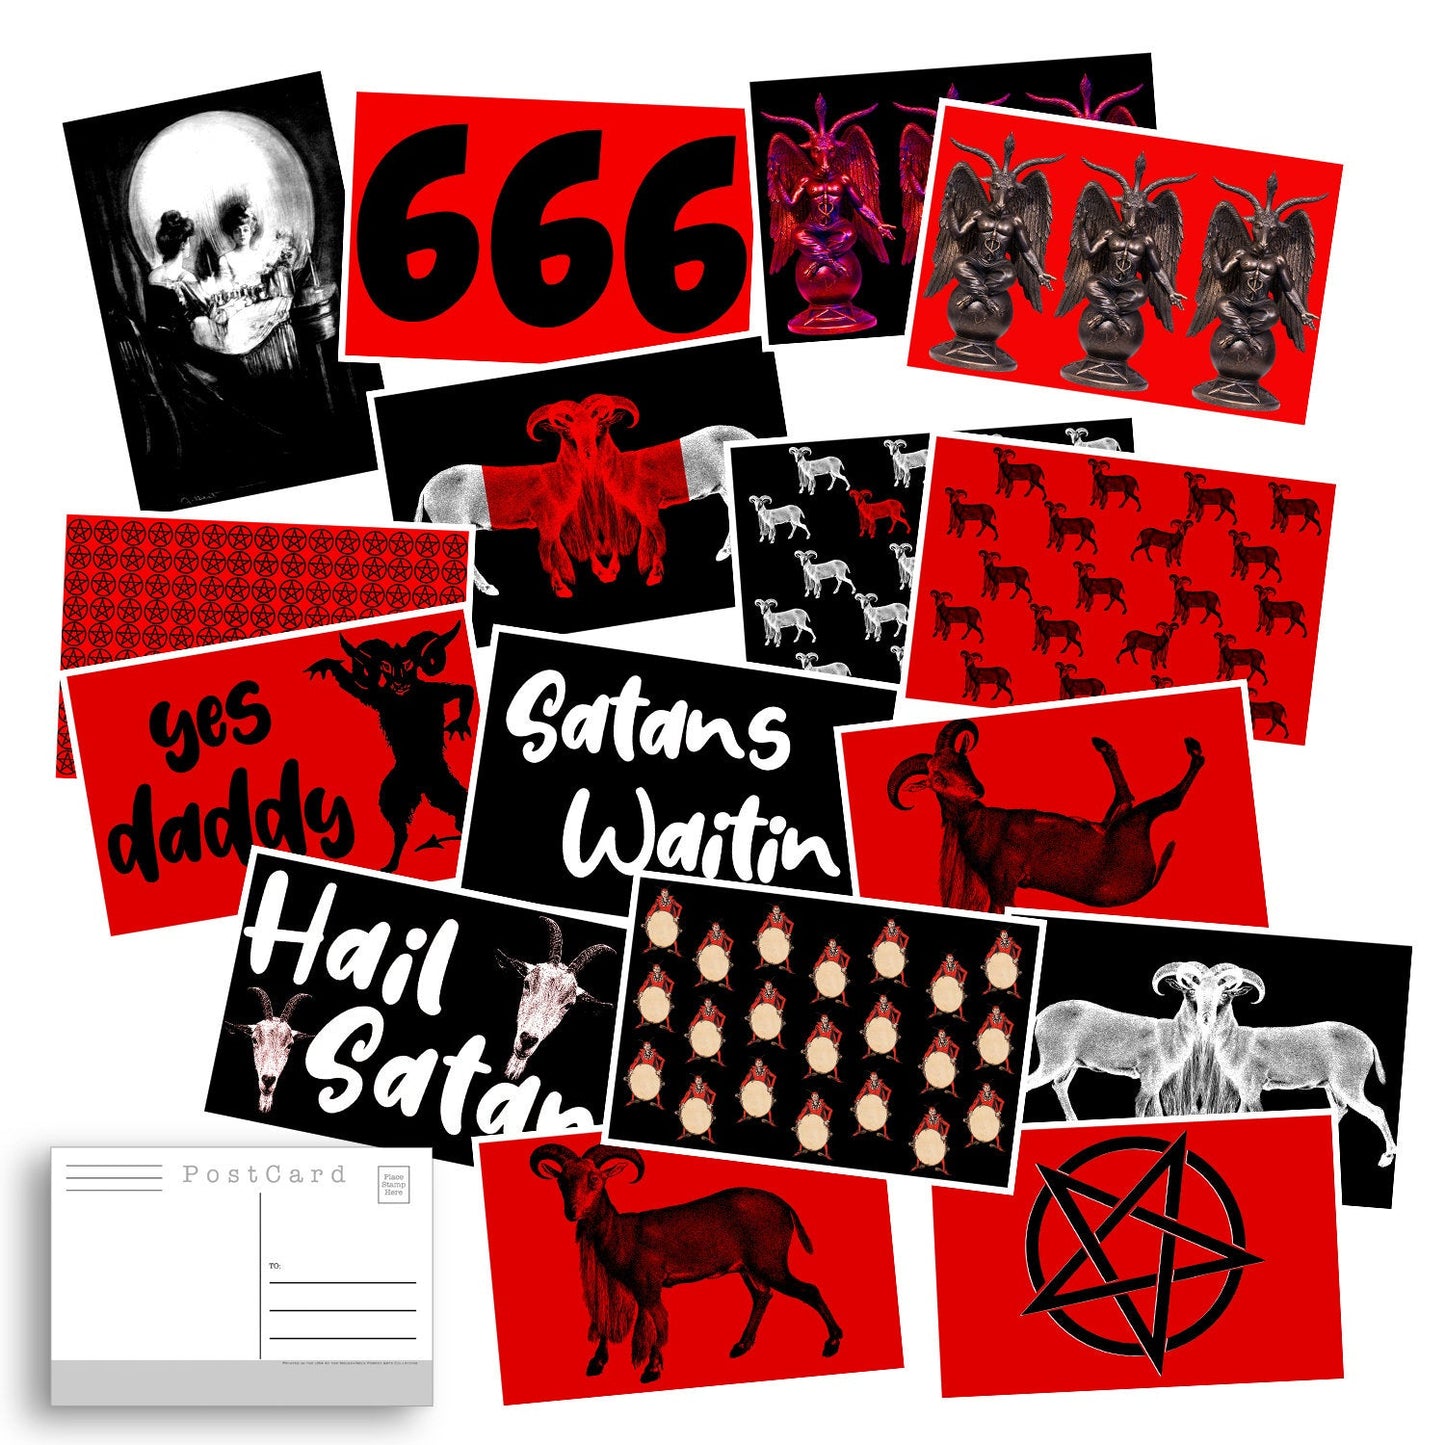 20 high quality Satanic Postcards great for mailing as Post Cards or use them l wall art, collage kits or for home decor